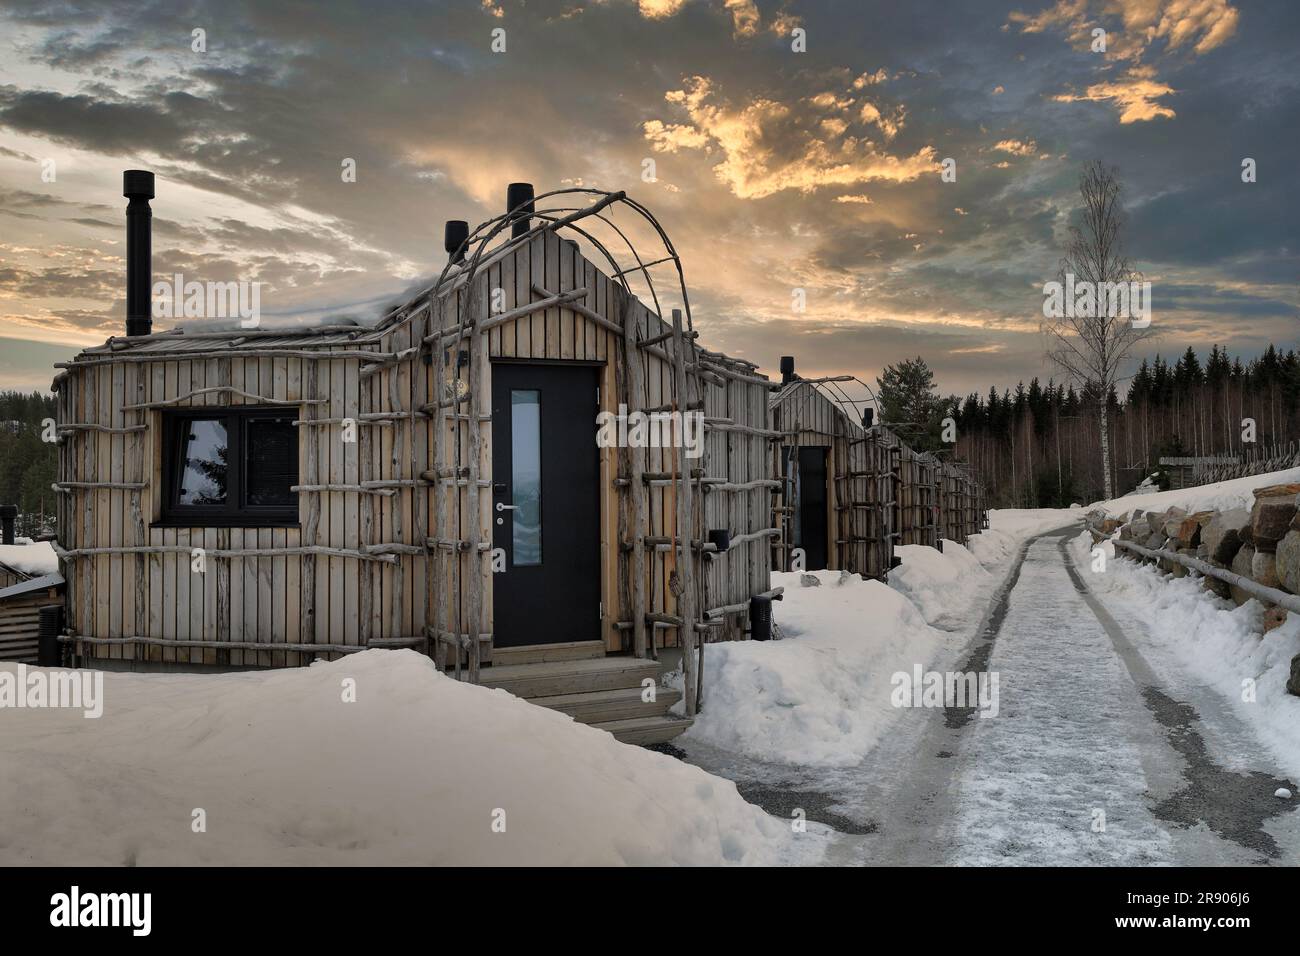 Jarvisydan Resort, Rantasalmi, Finland - Distinctive wooden lodges shot at sunset at the resort pictured in winter with snow on the ground Stock Photo